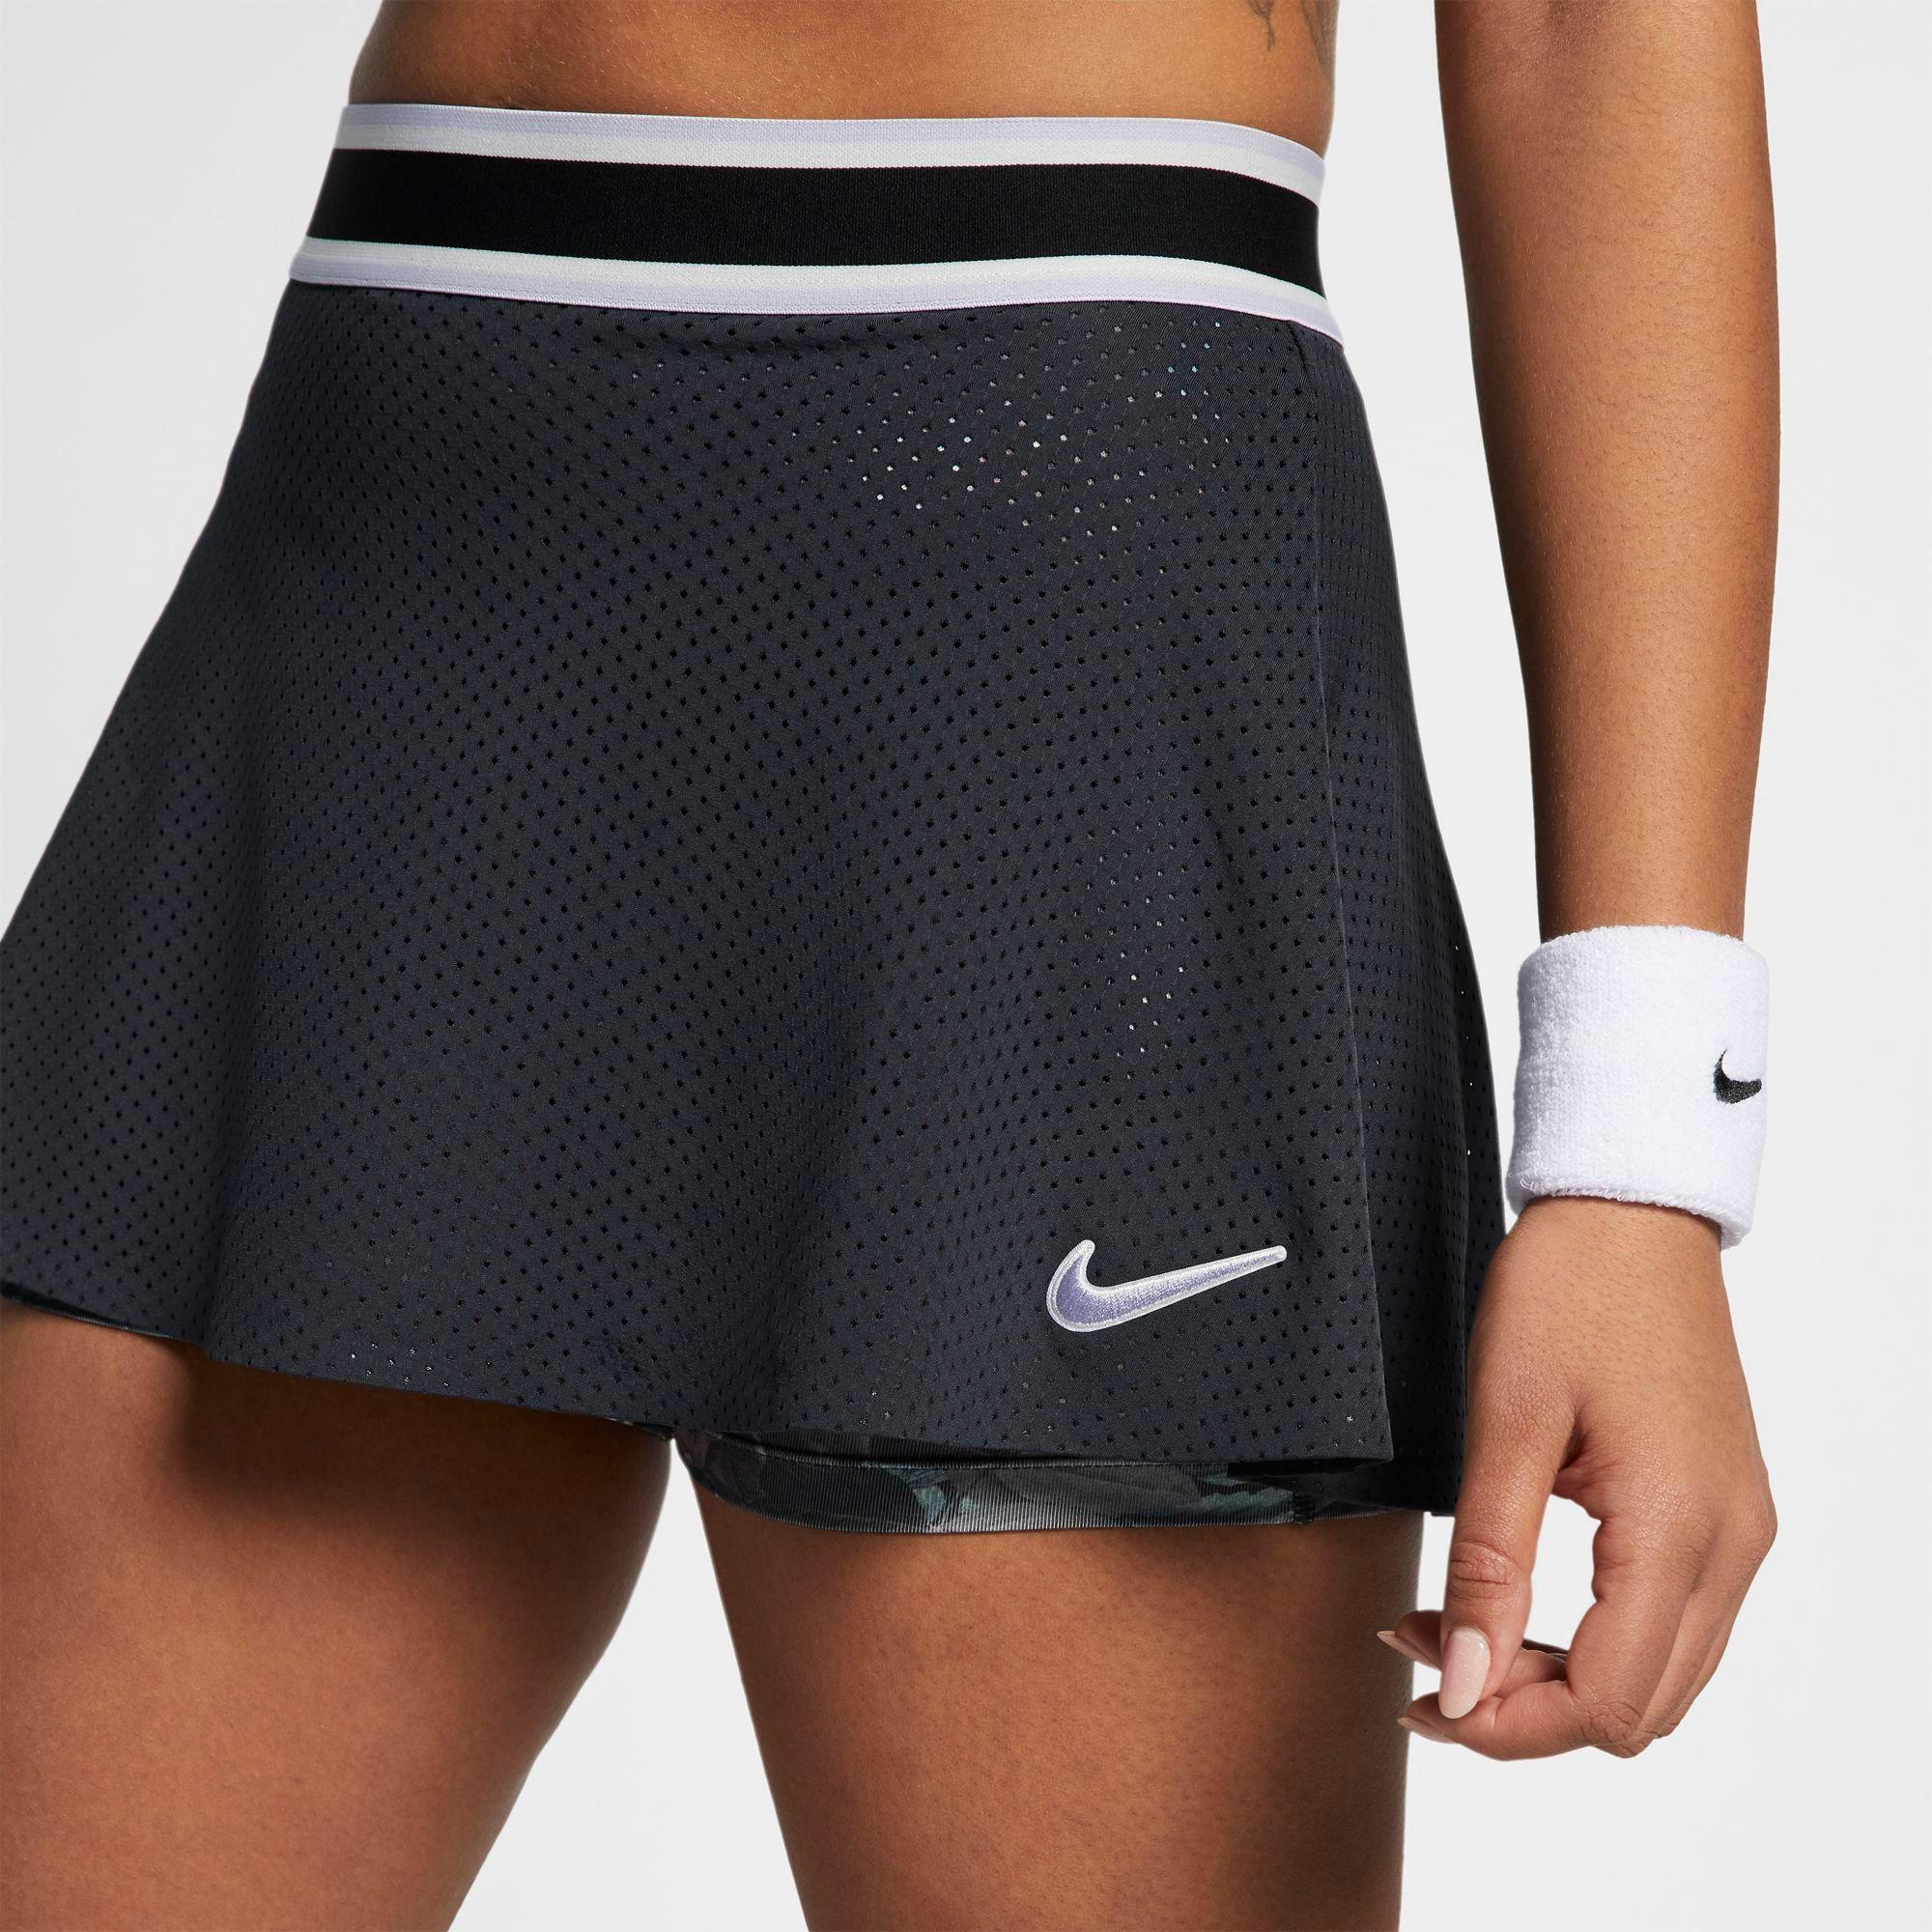 Nike Synthetic Dri-fit Perforated Tennis Skirt in Black - Lyst